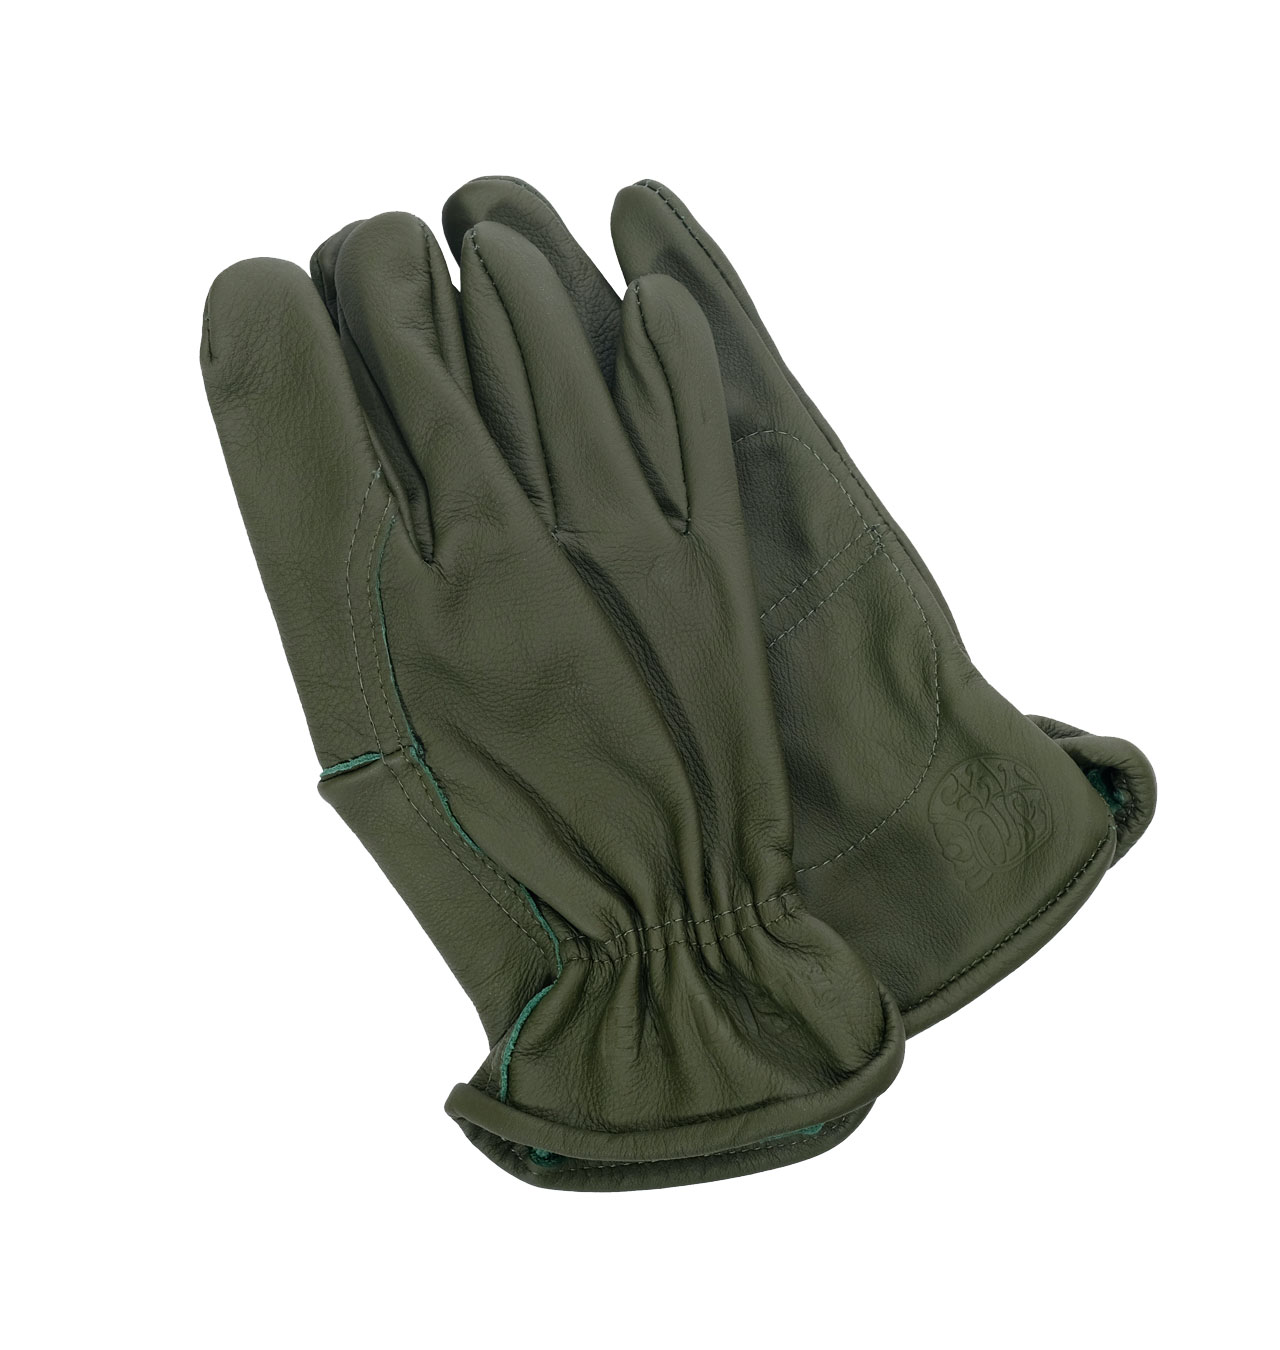 Eat Dust - X Power Glove Leather - Green